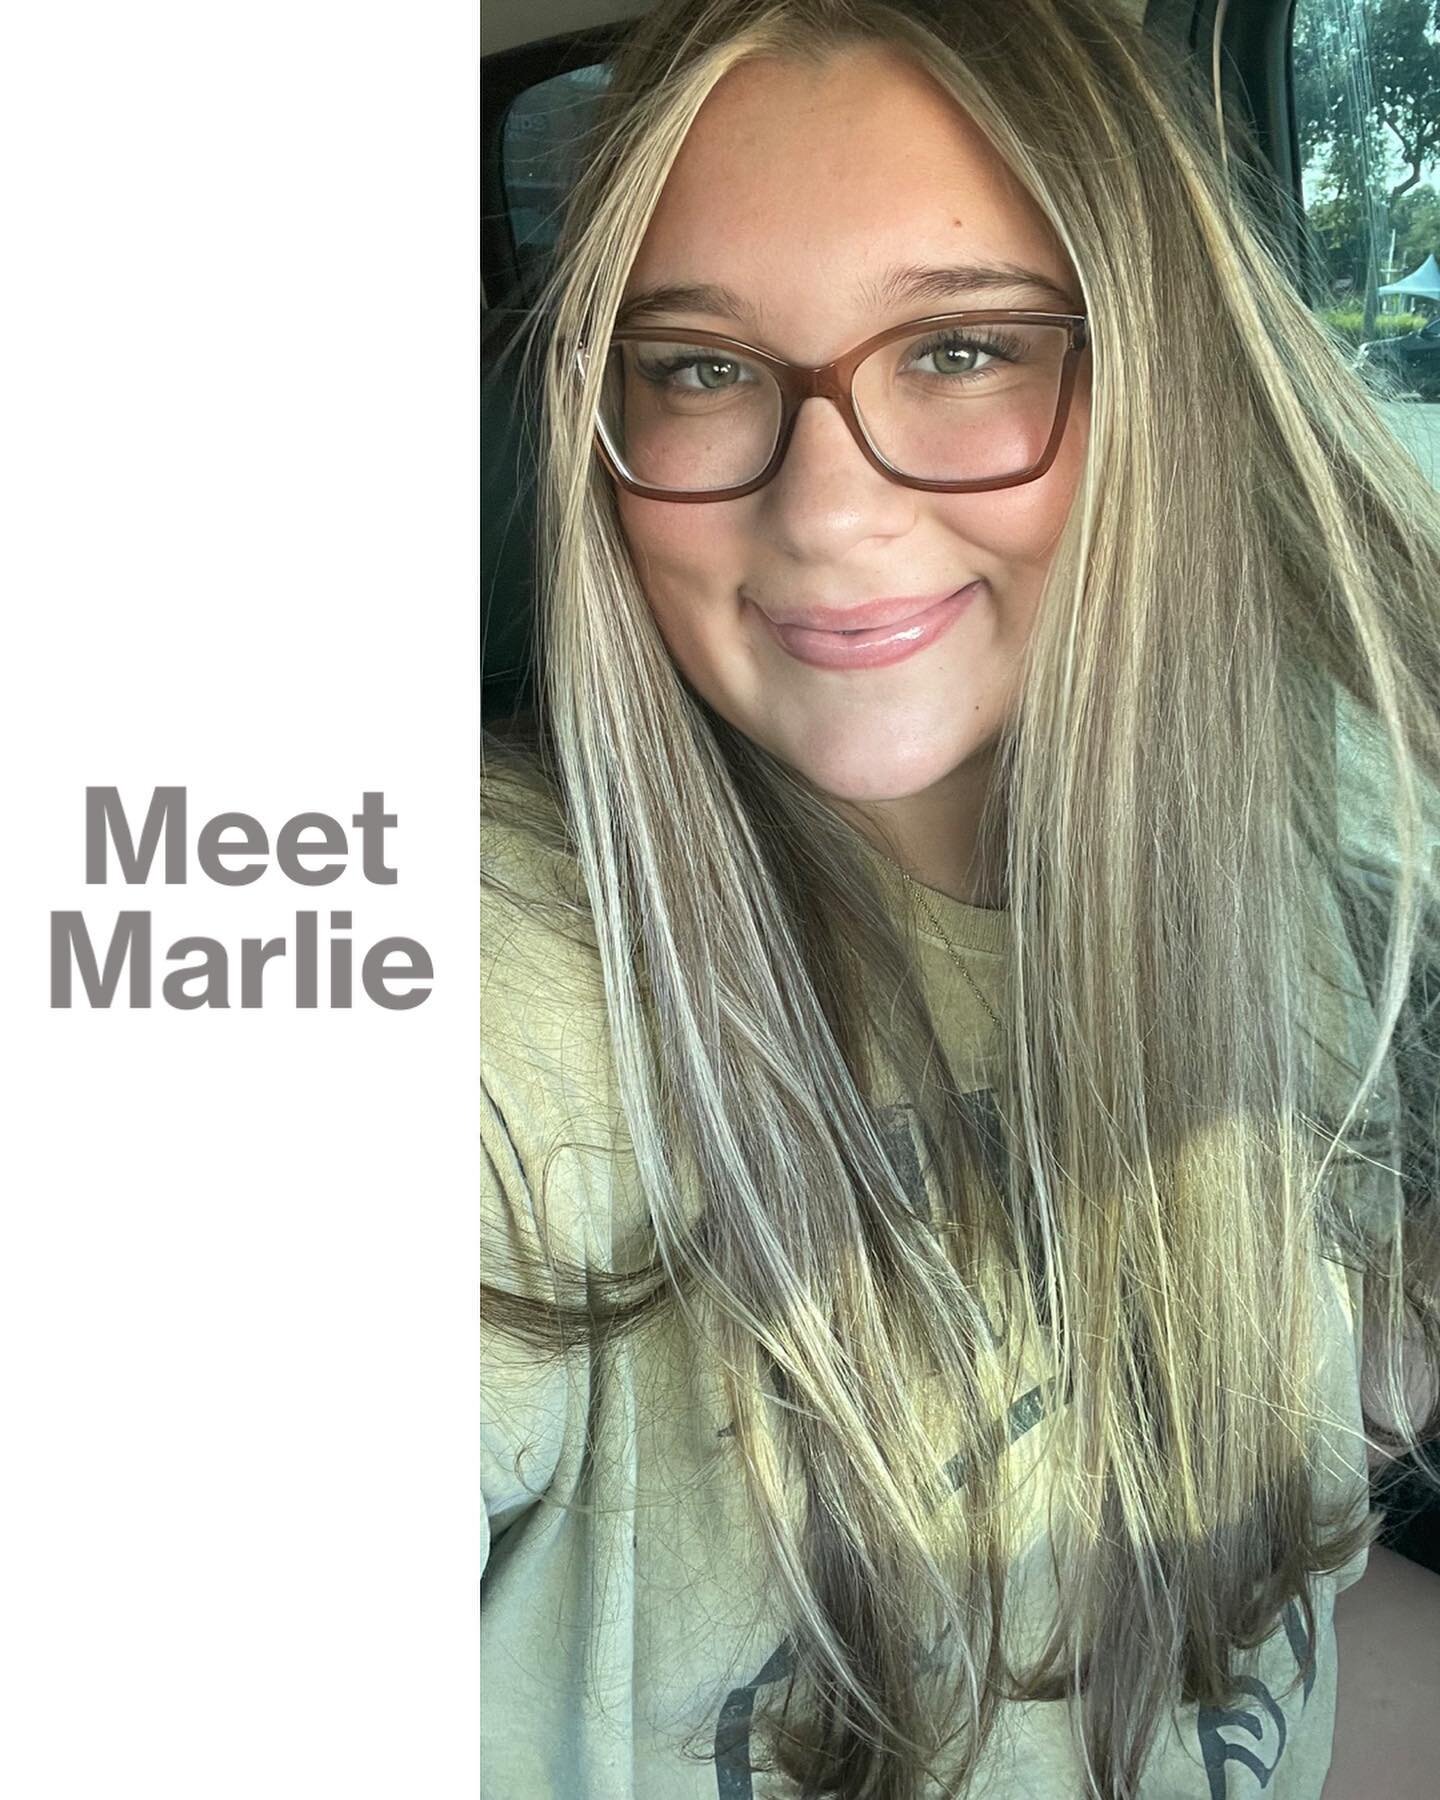 🌟 MEET MARLIE 🌟
Meet Marlie the newest member of our support staff.  When you see her bee boppin around the salon be sure to say hello. 
✨
Marlie likes: 
Sushi, shopping, and spending quality time with her friends and family.
✨
She dislikes:
Mustar